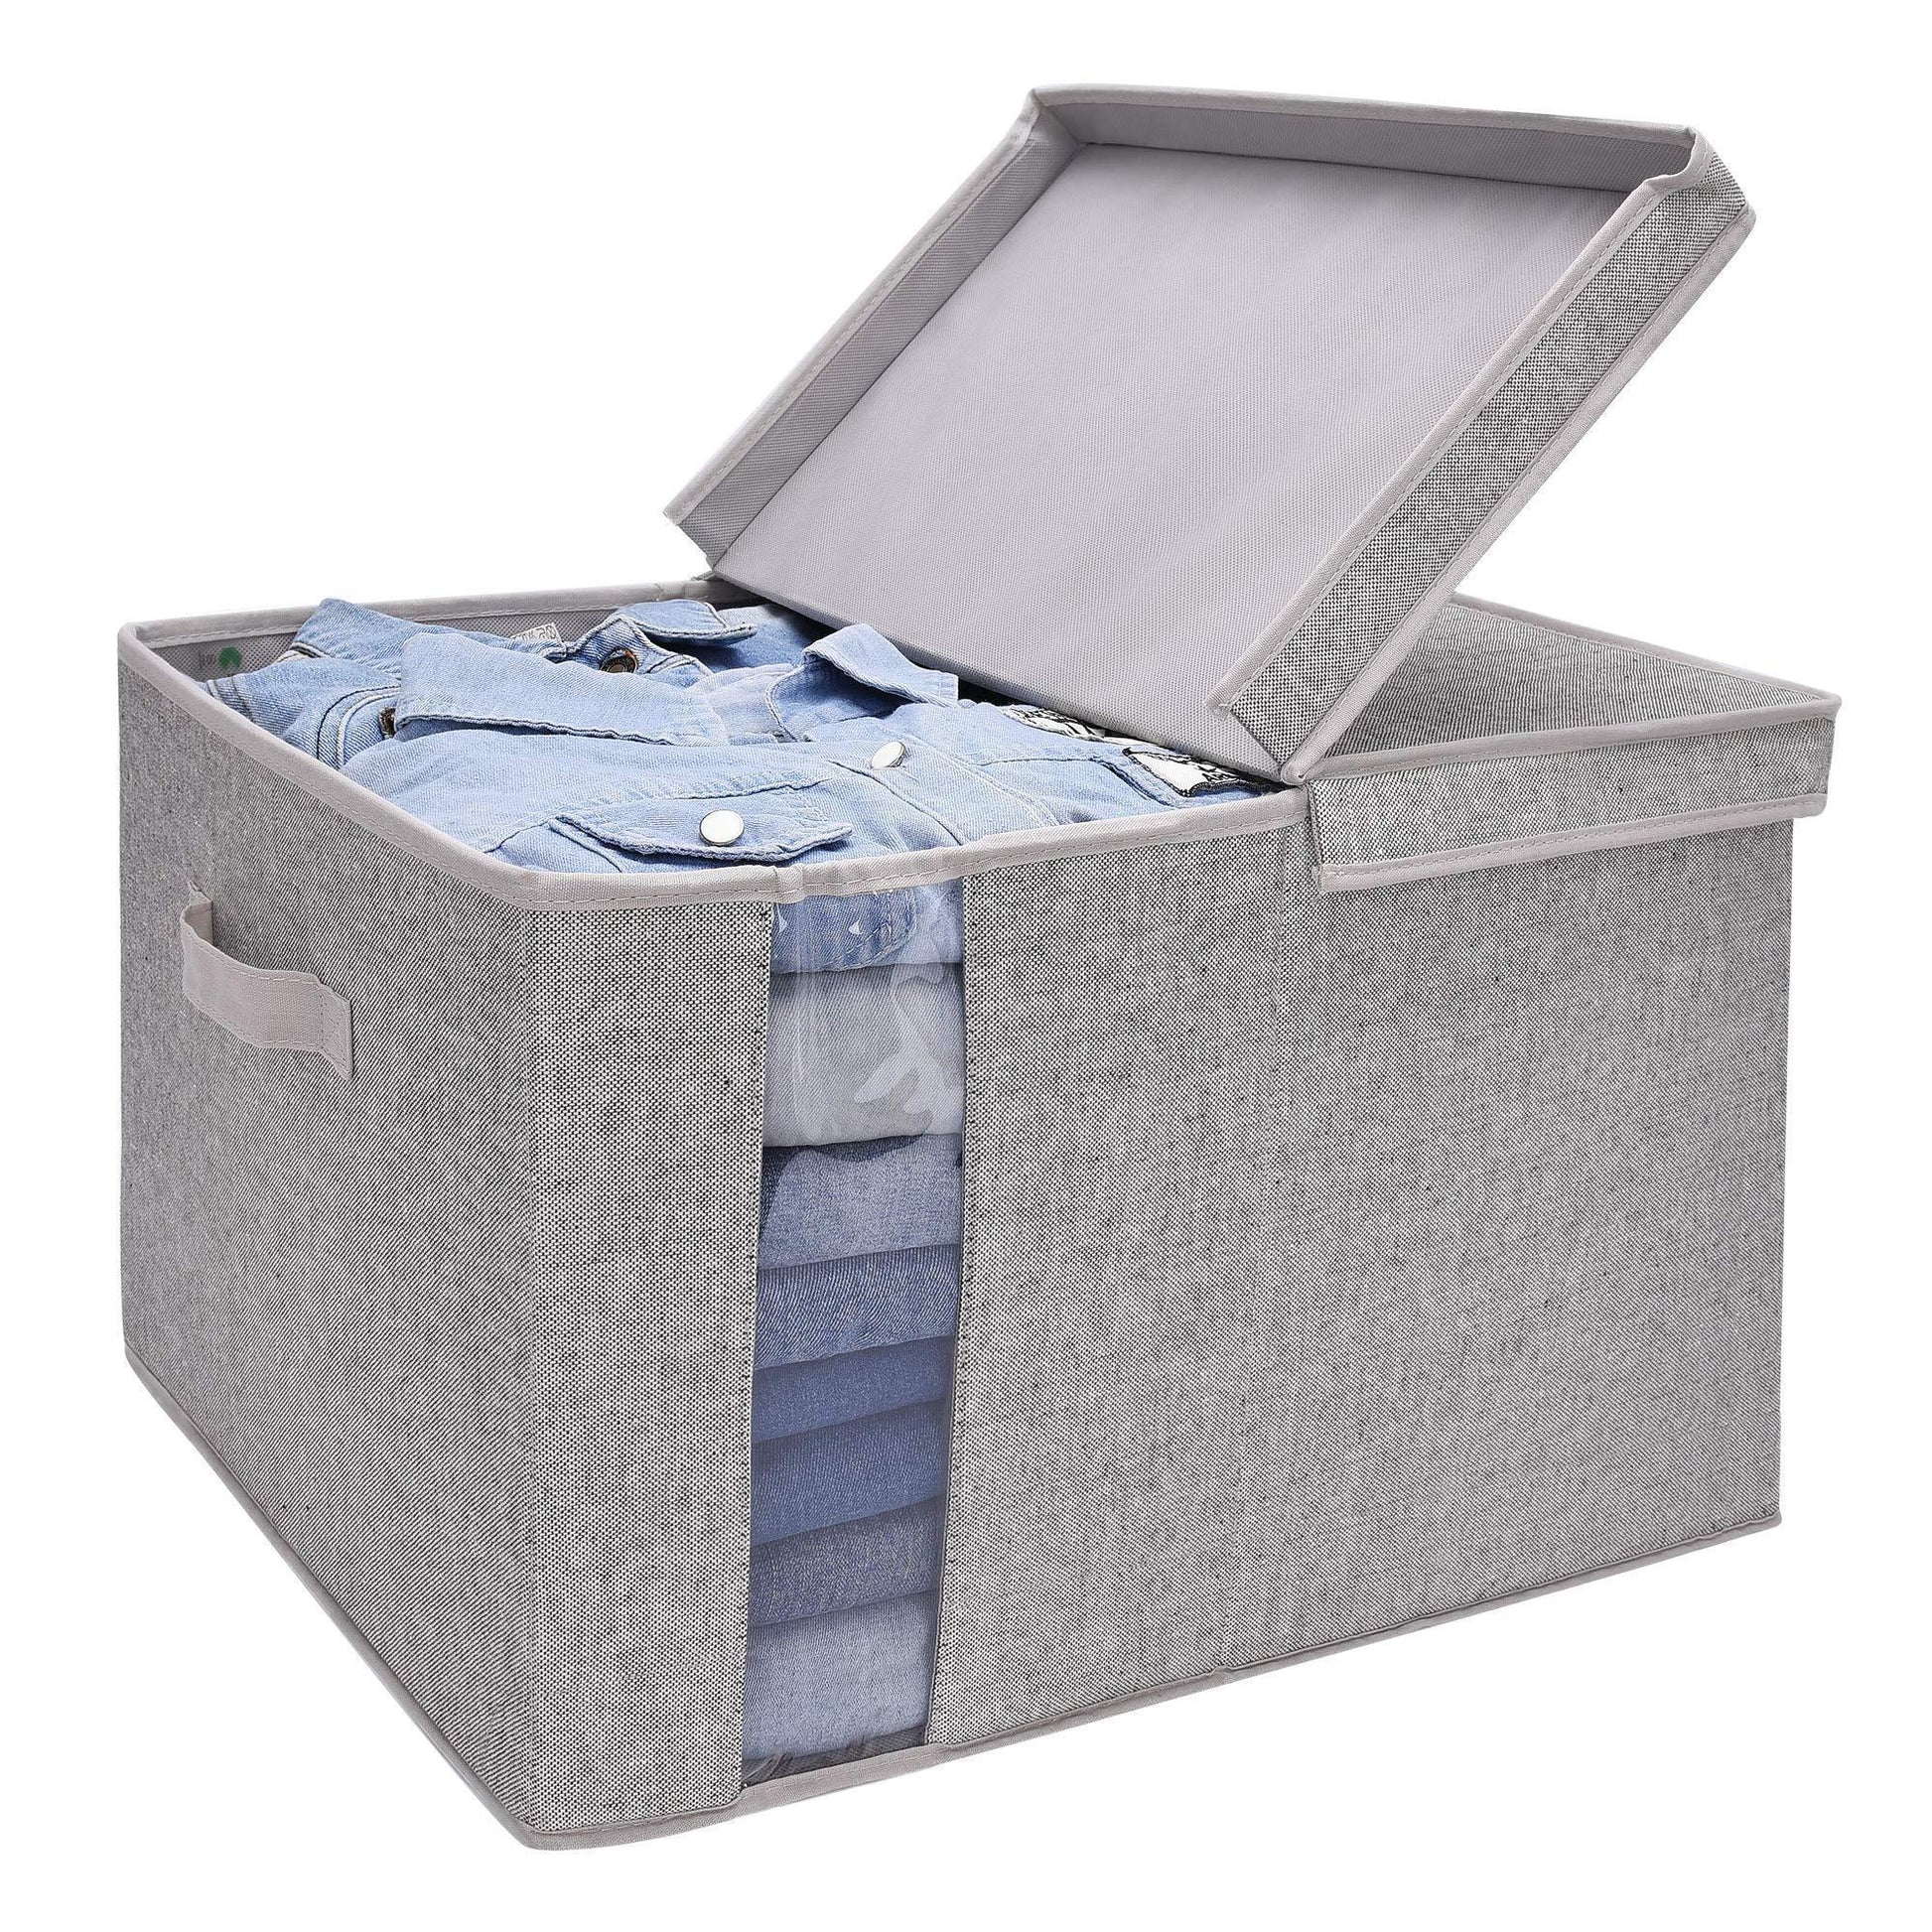 Featured storageworks closet storage organizer with transparent clear window storage boxes with lid double open lid gray cotton fabric box jumbo